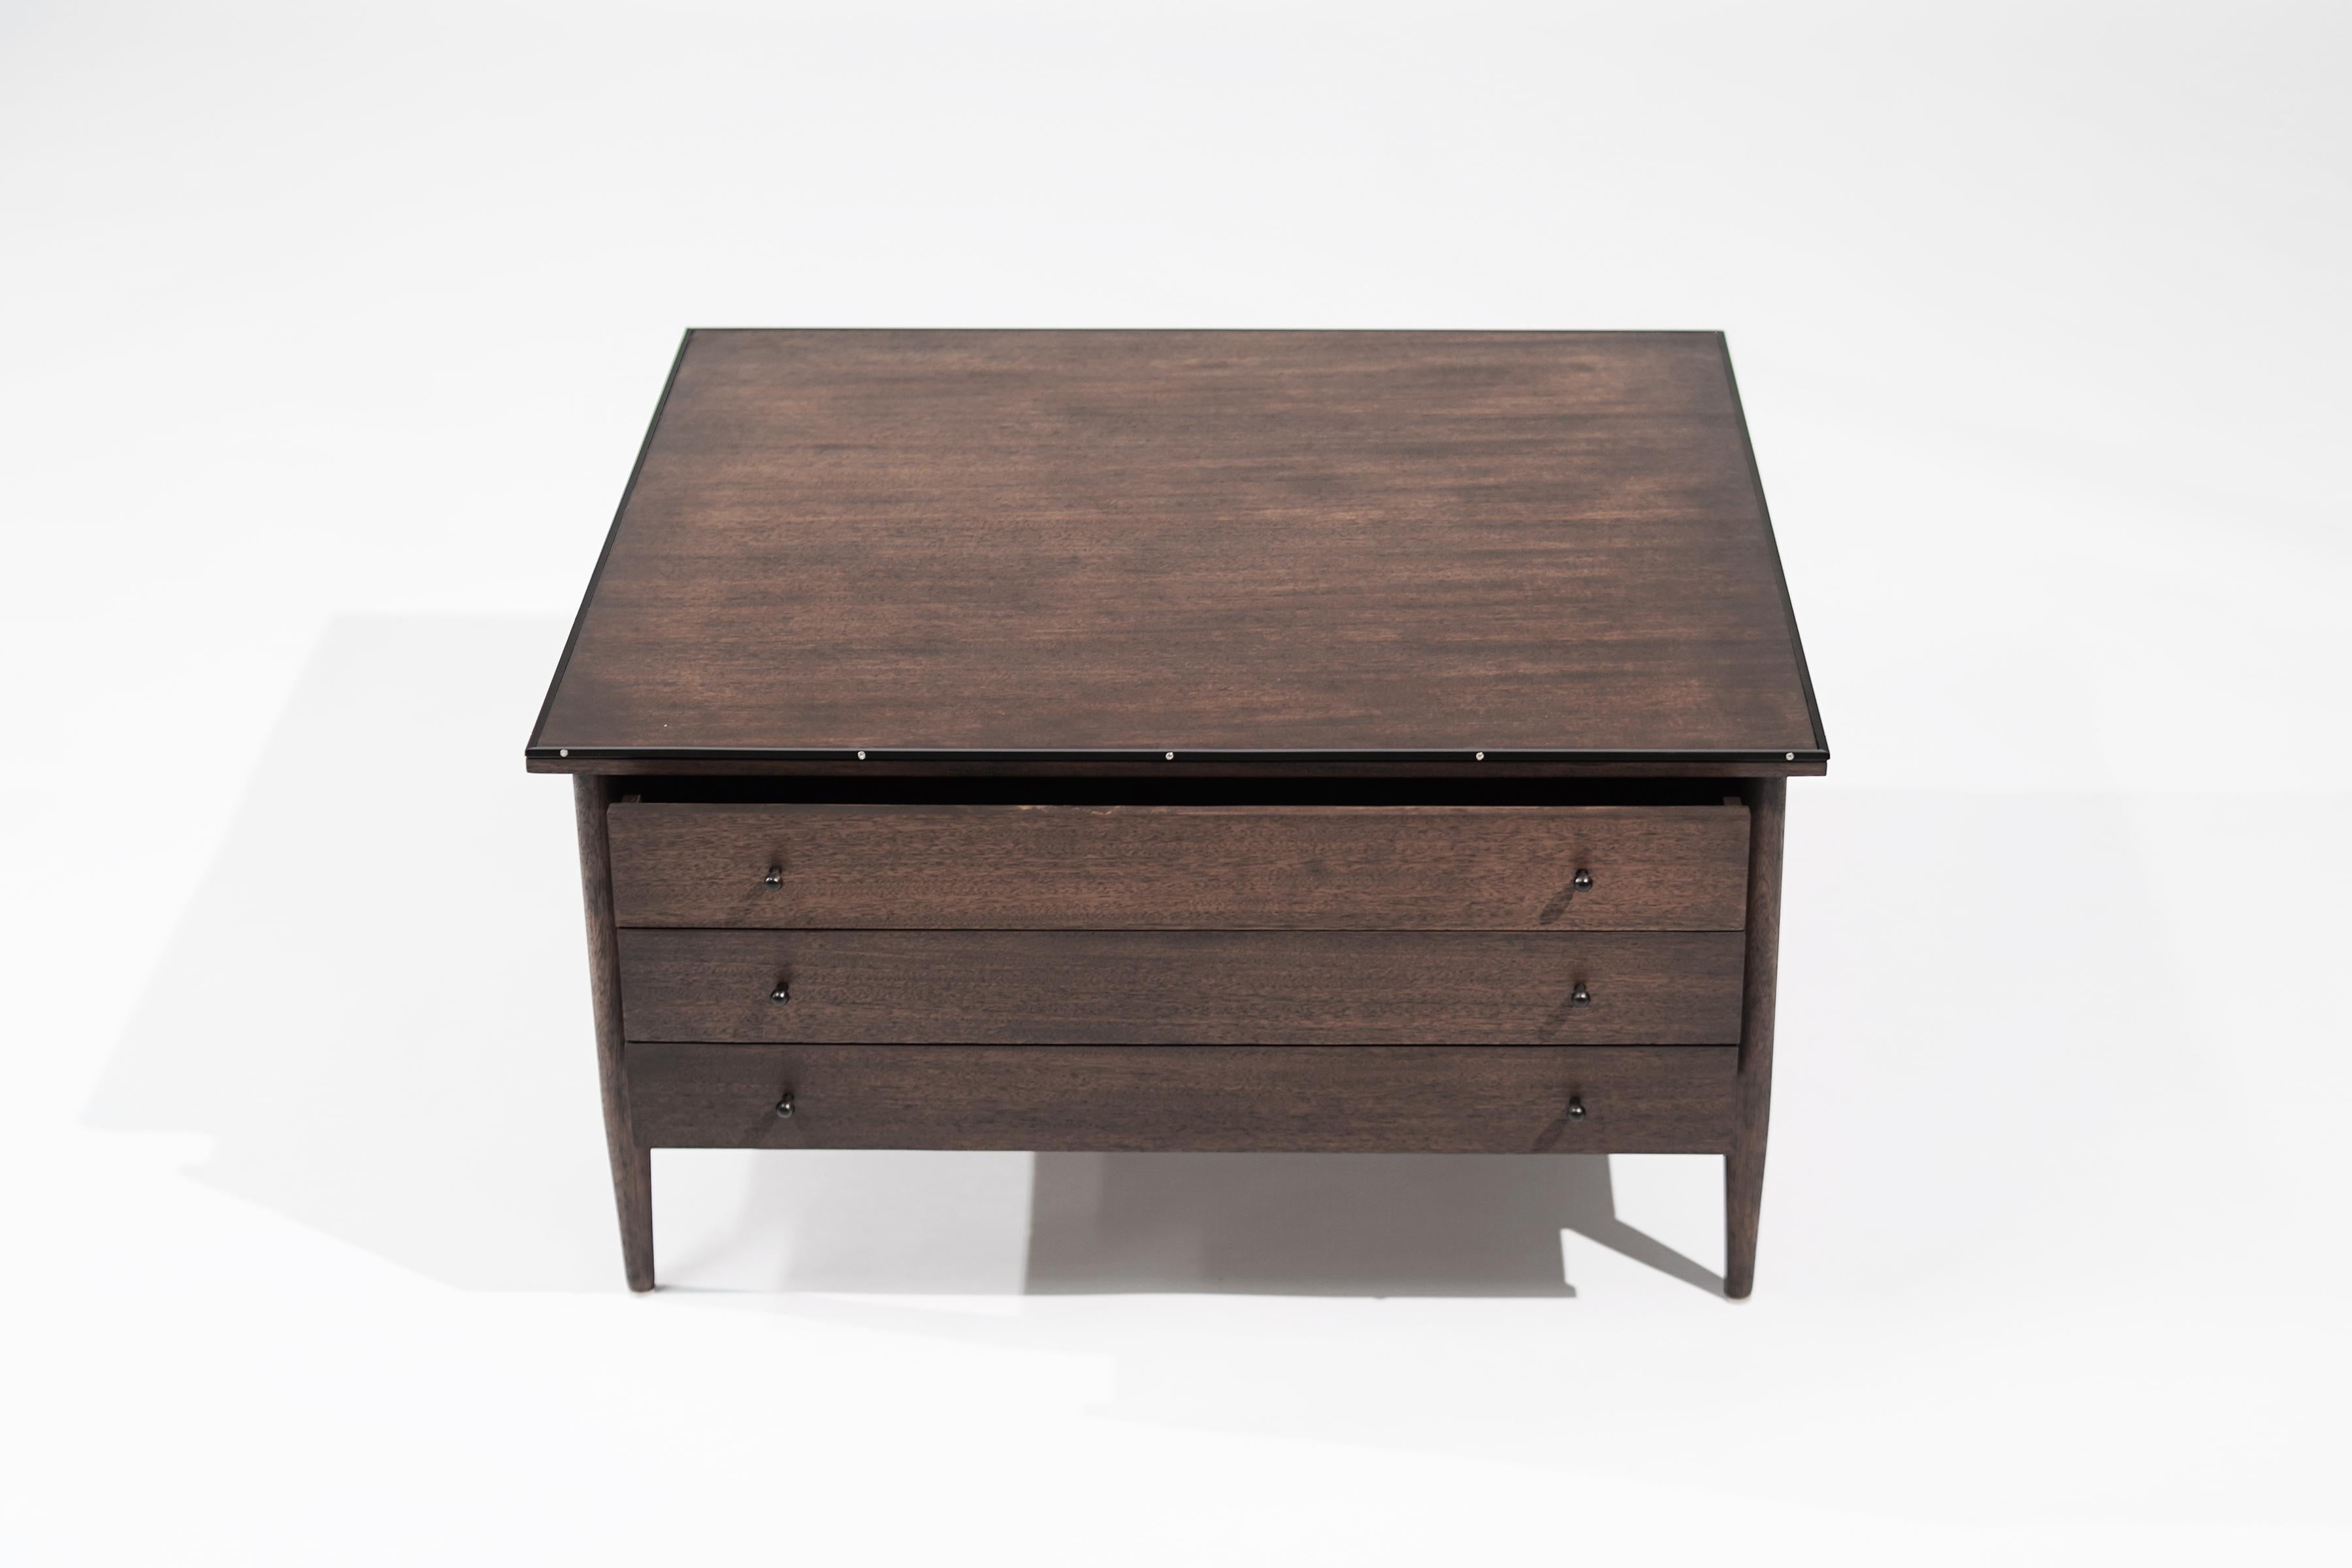 North American Connoisseur Collection Coffee Table by Paul McCobb, C. 1950s For Sale